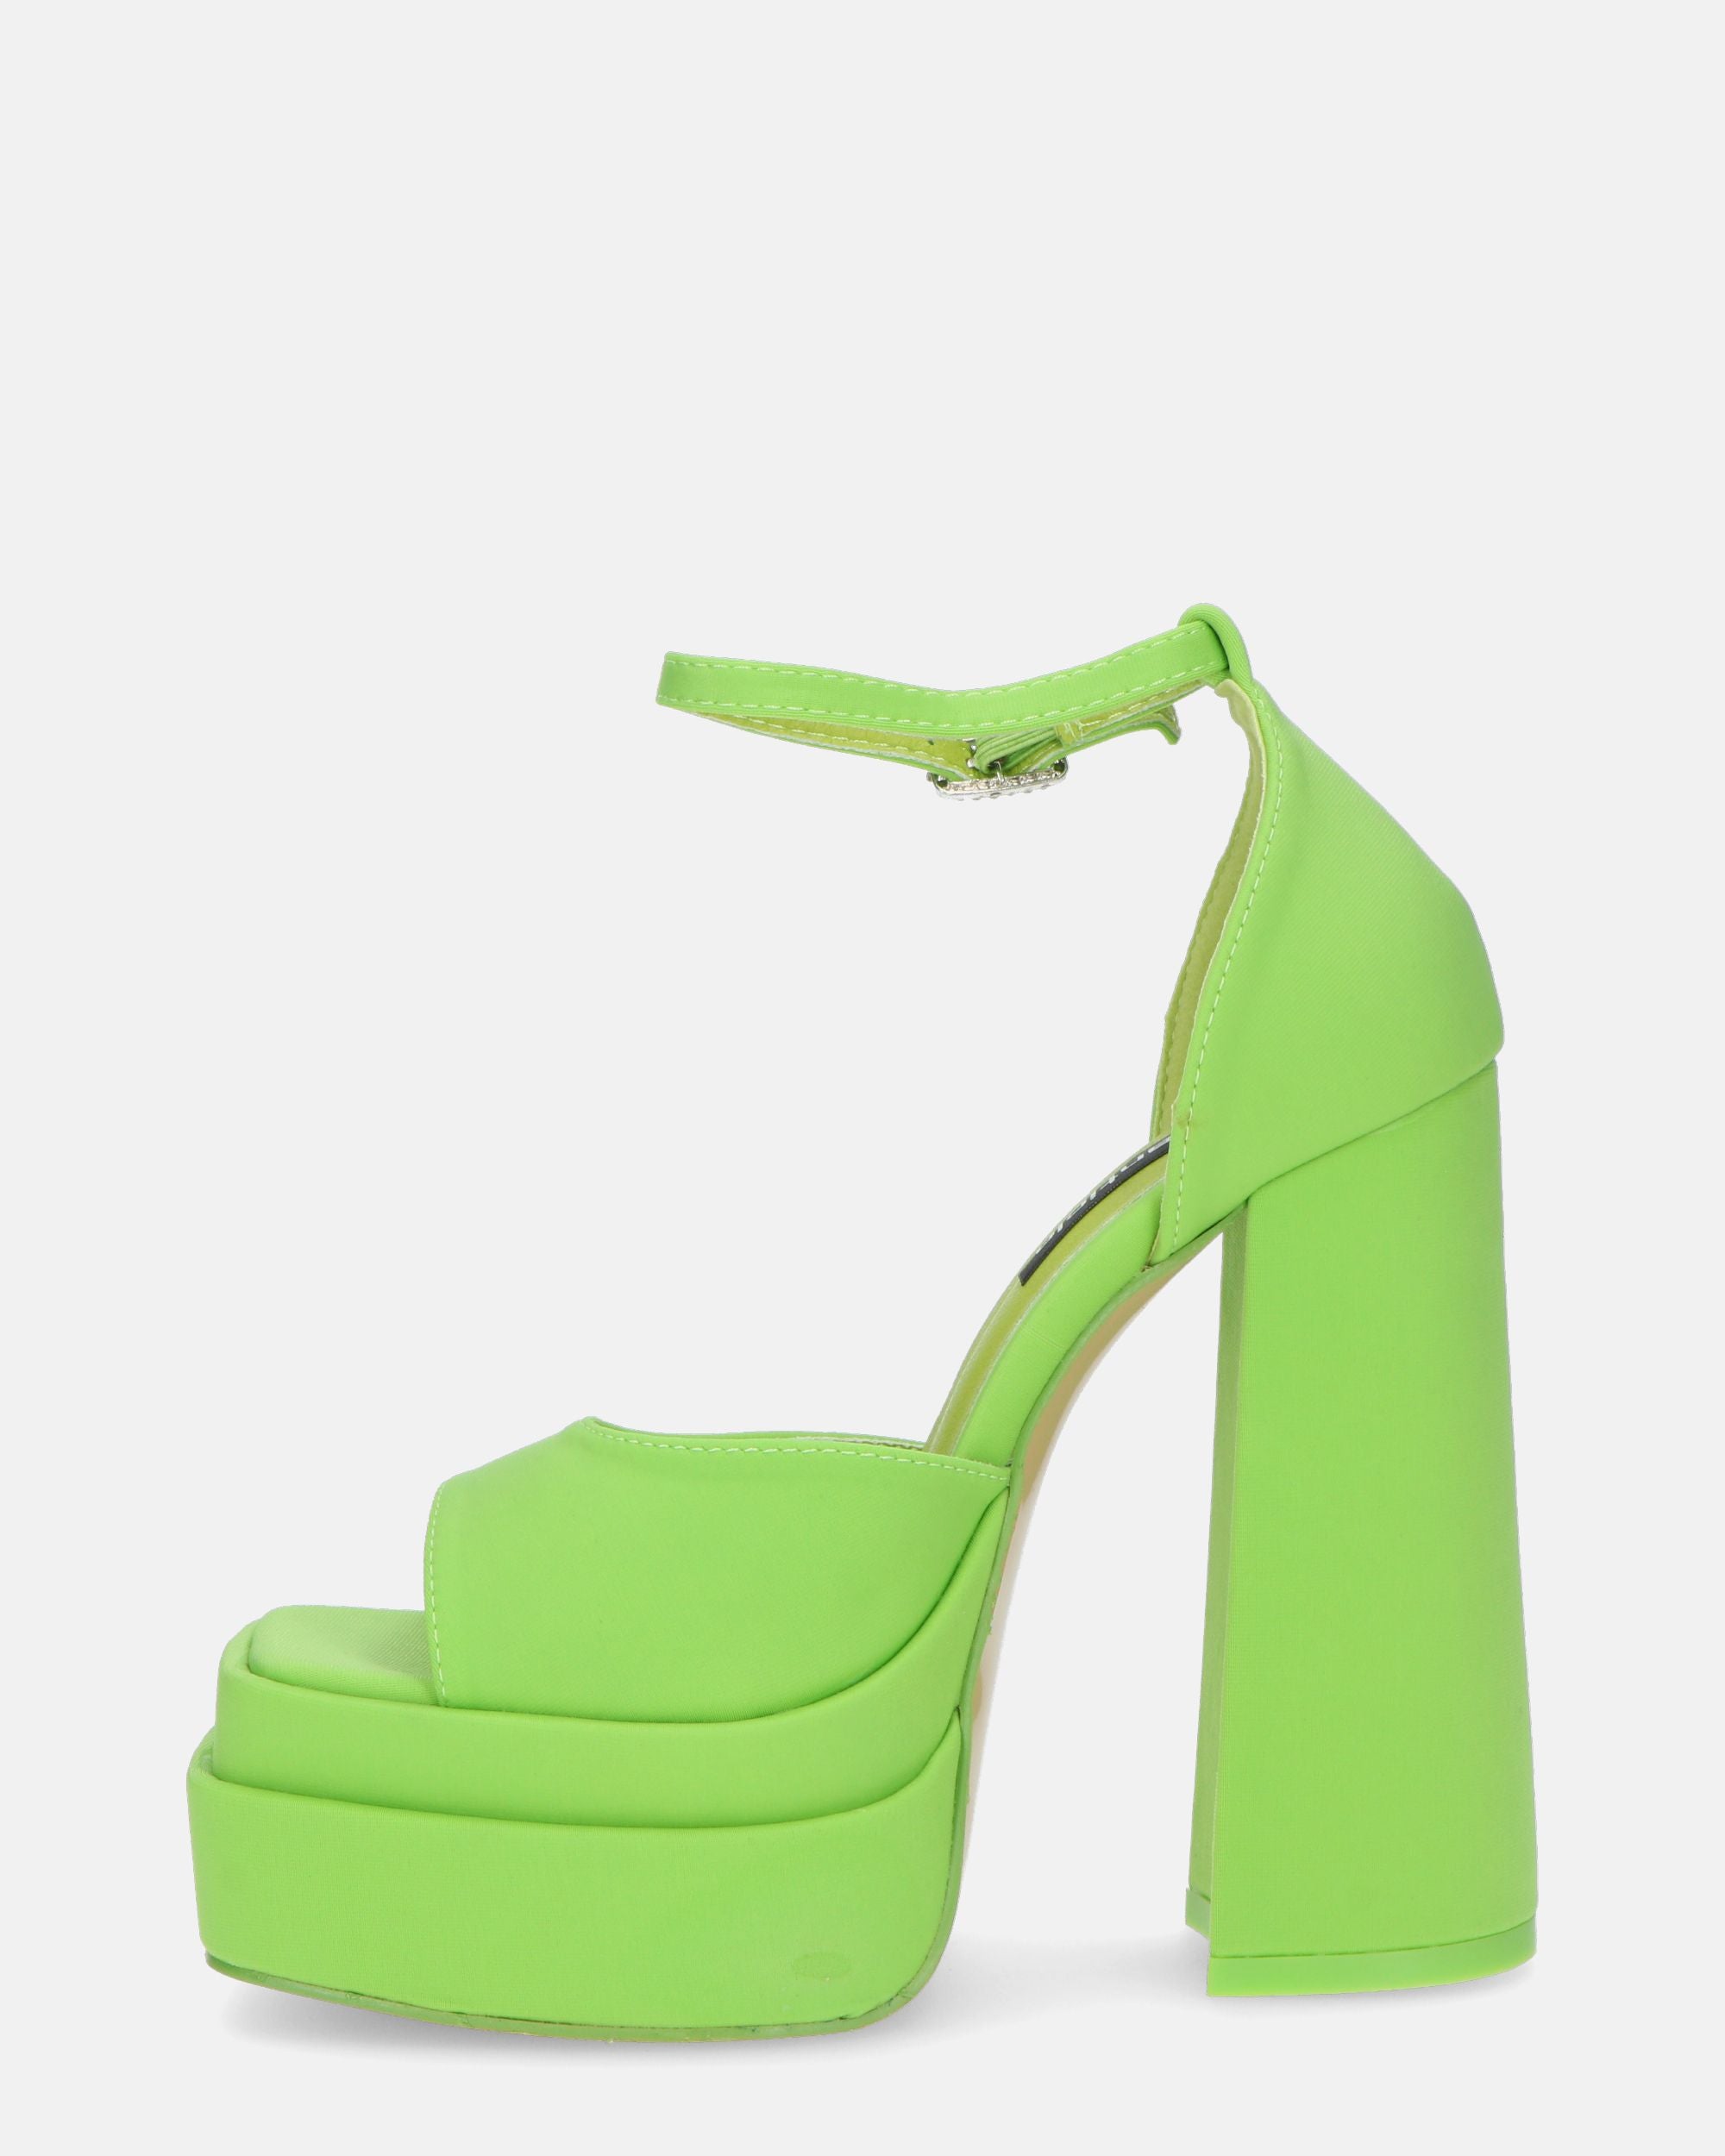 AVA - sandals with high heels in green lycra and gems in the strap